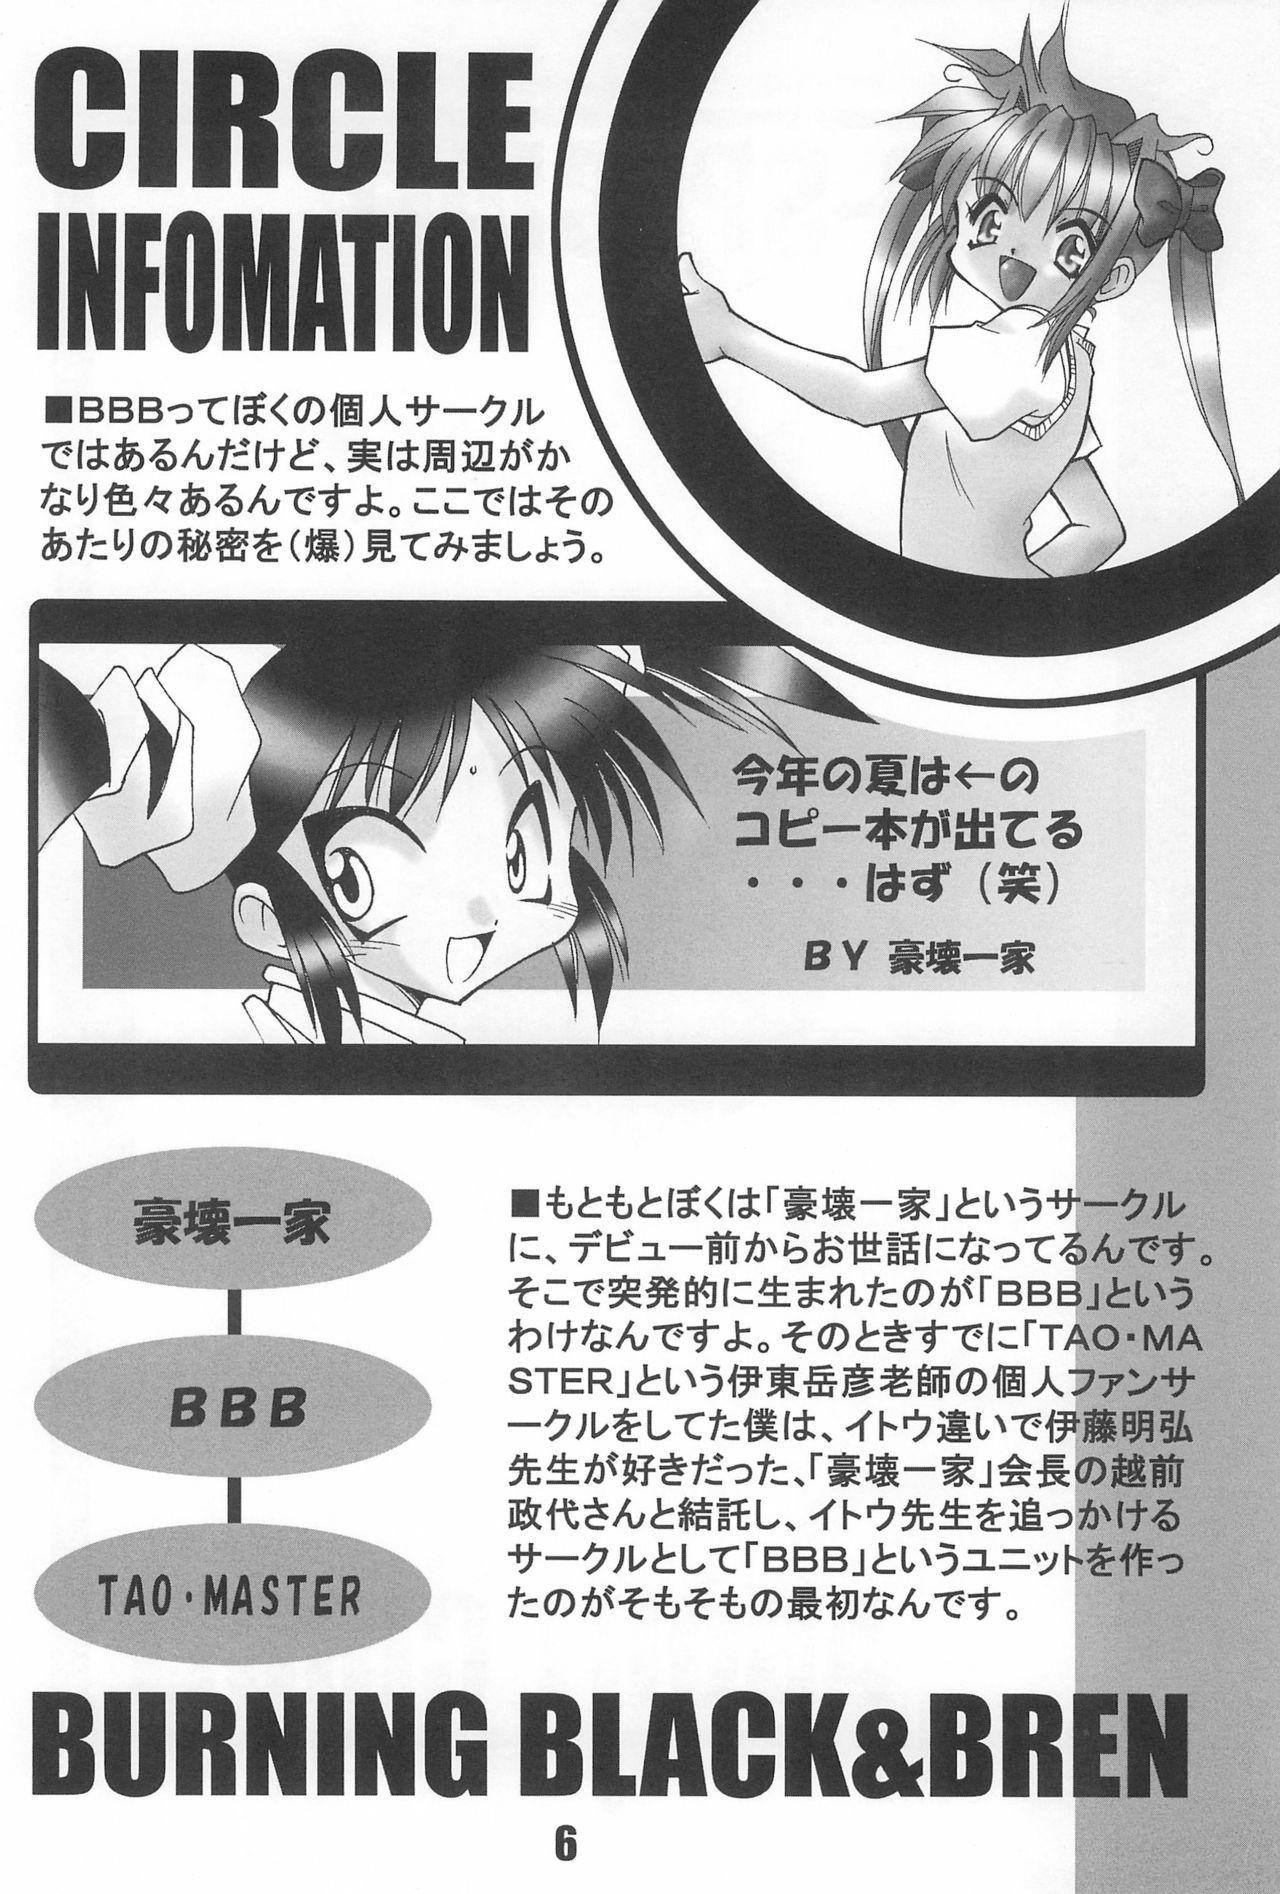 Blowing BBB OFFICIAL GUIDE BOOK - Cardcaptor sakura Negra - Page 6